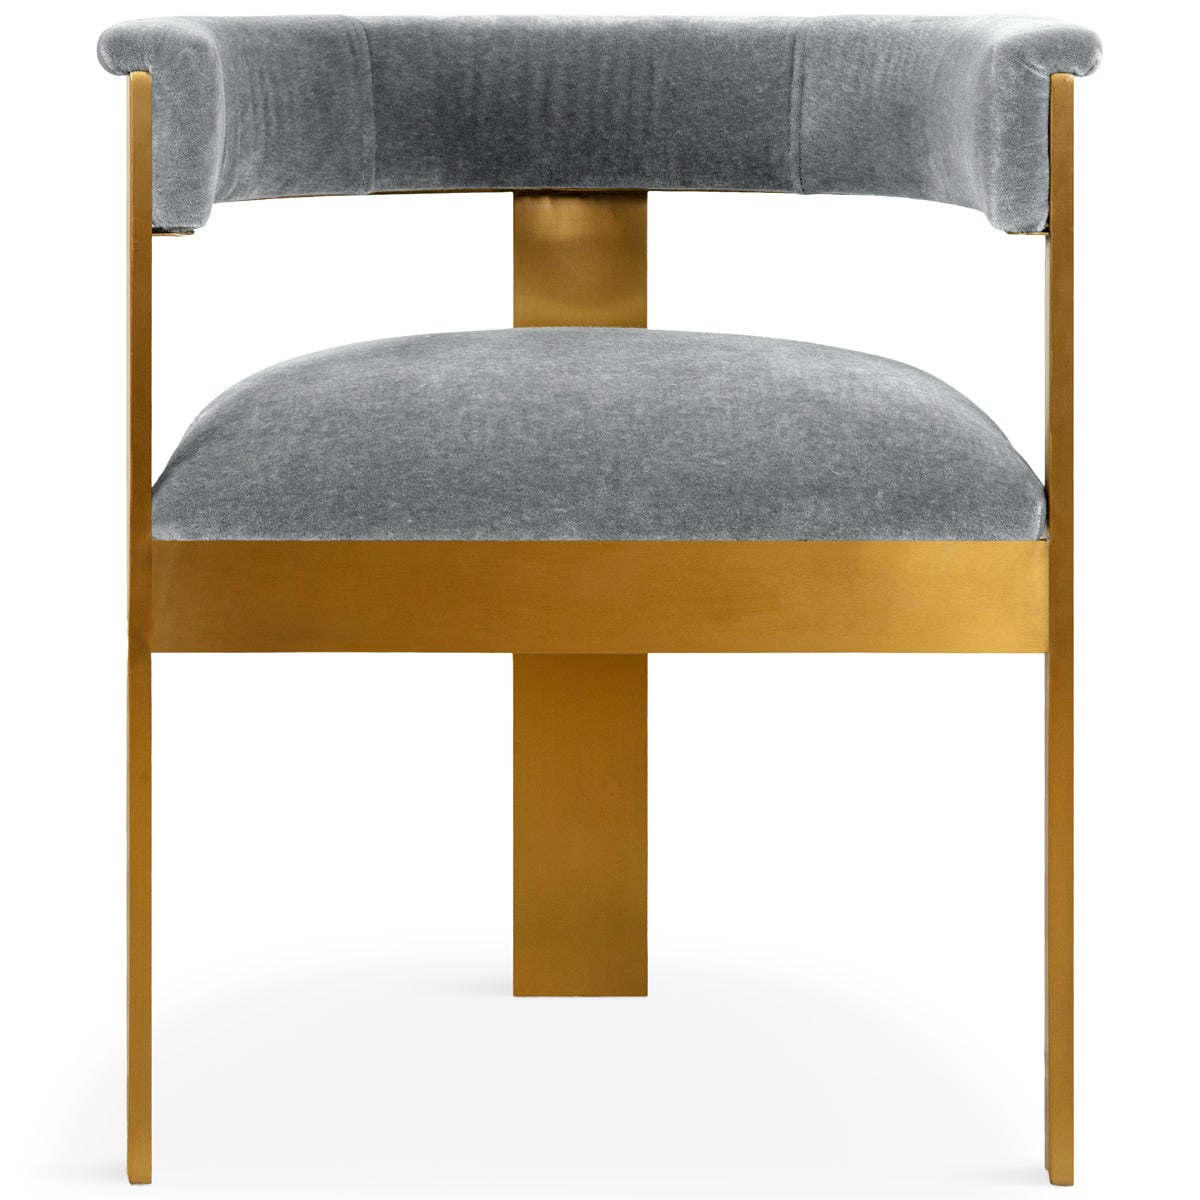 Marseille Dining Chair in Mohair - ModShop1.com